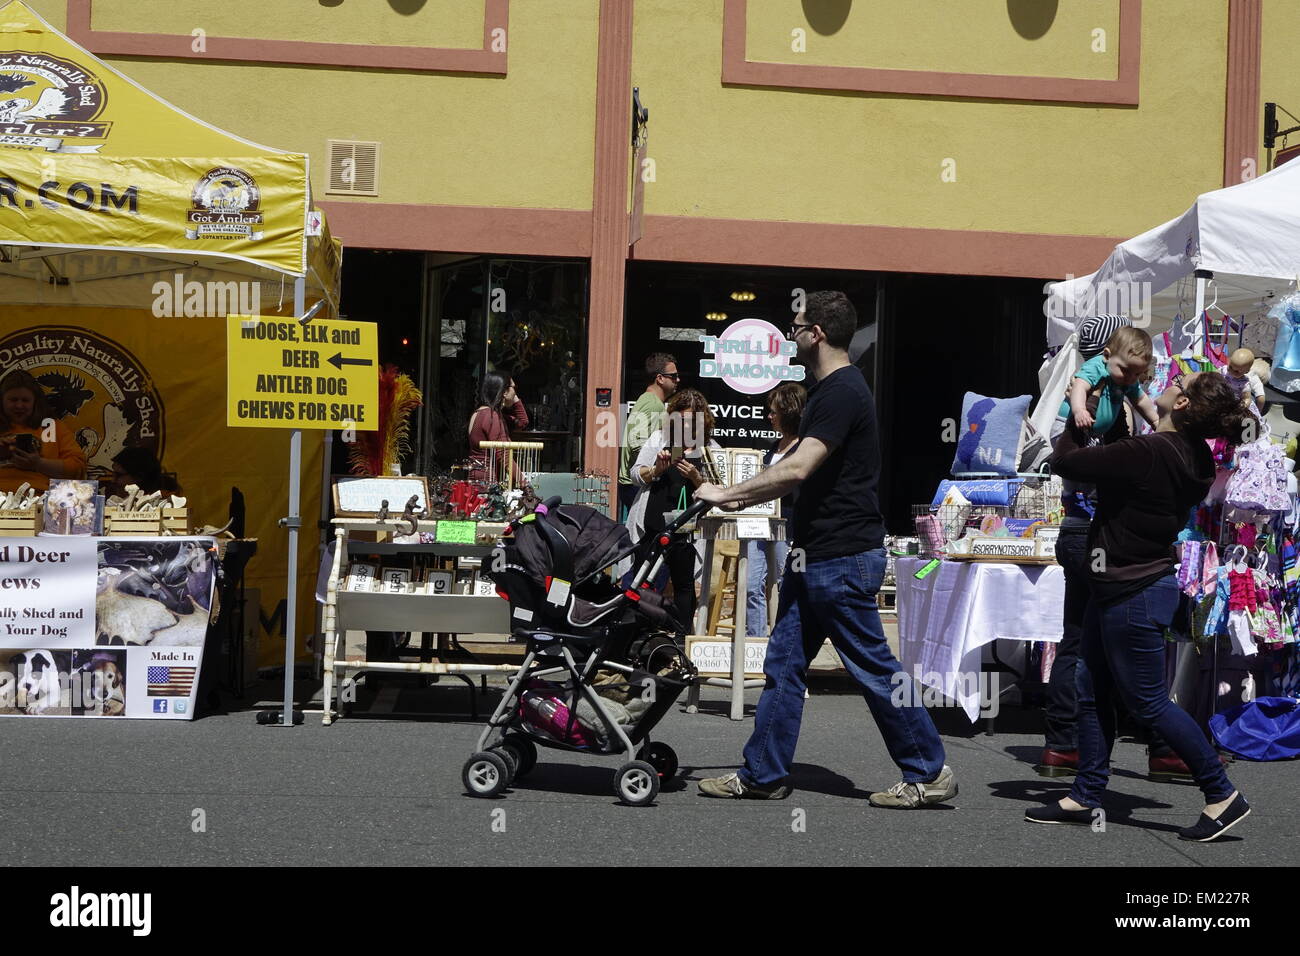 Red Bank, Middlesex County, New Jersey. Straße Fair und Musikfestival, April 2015. Stockfoto